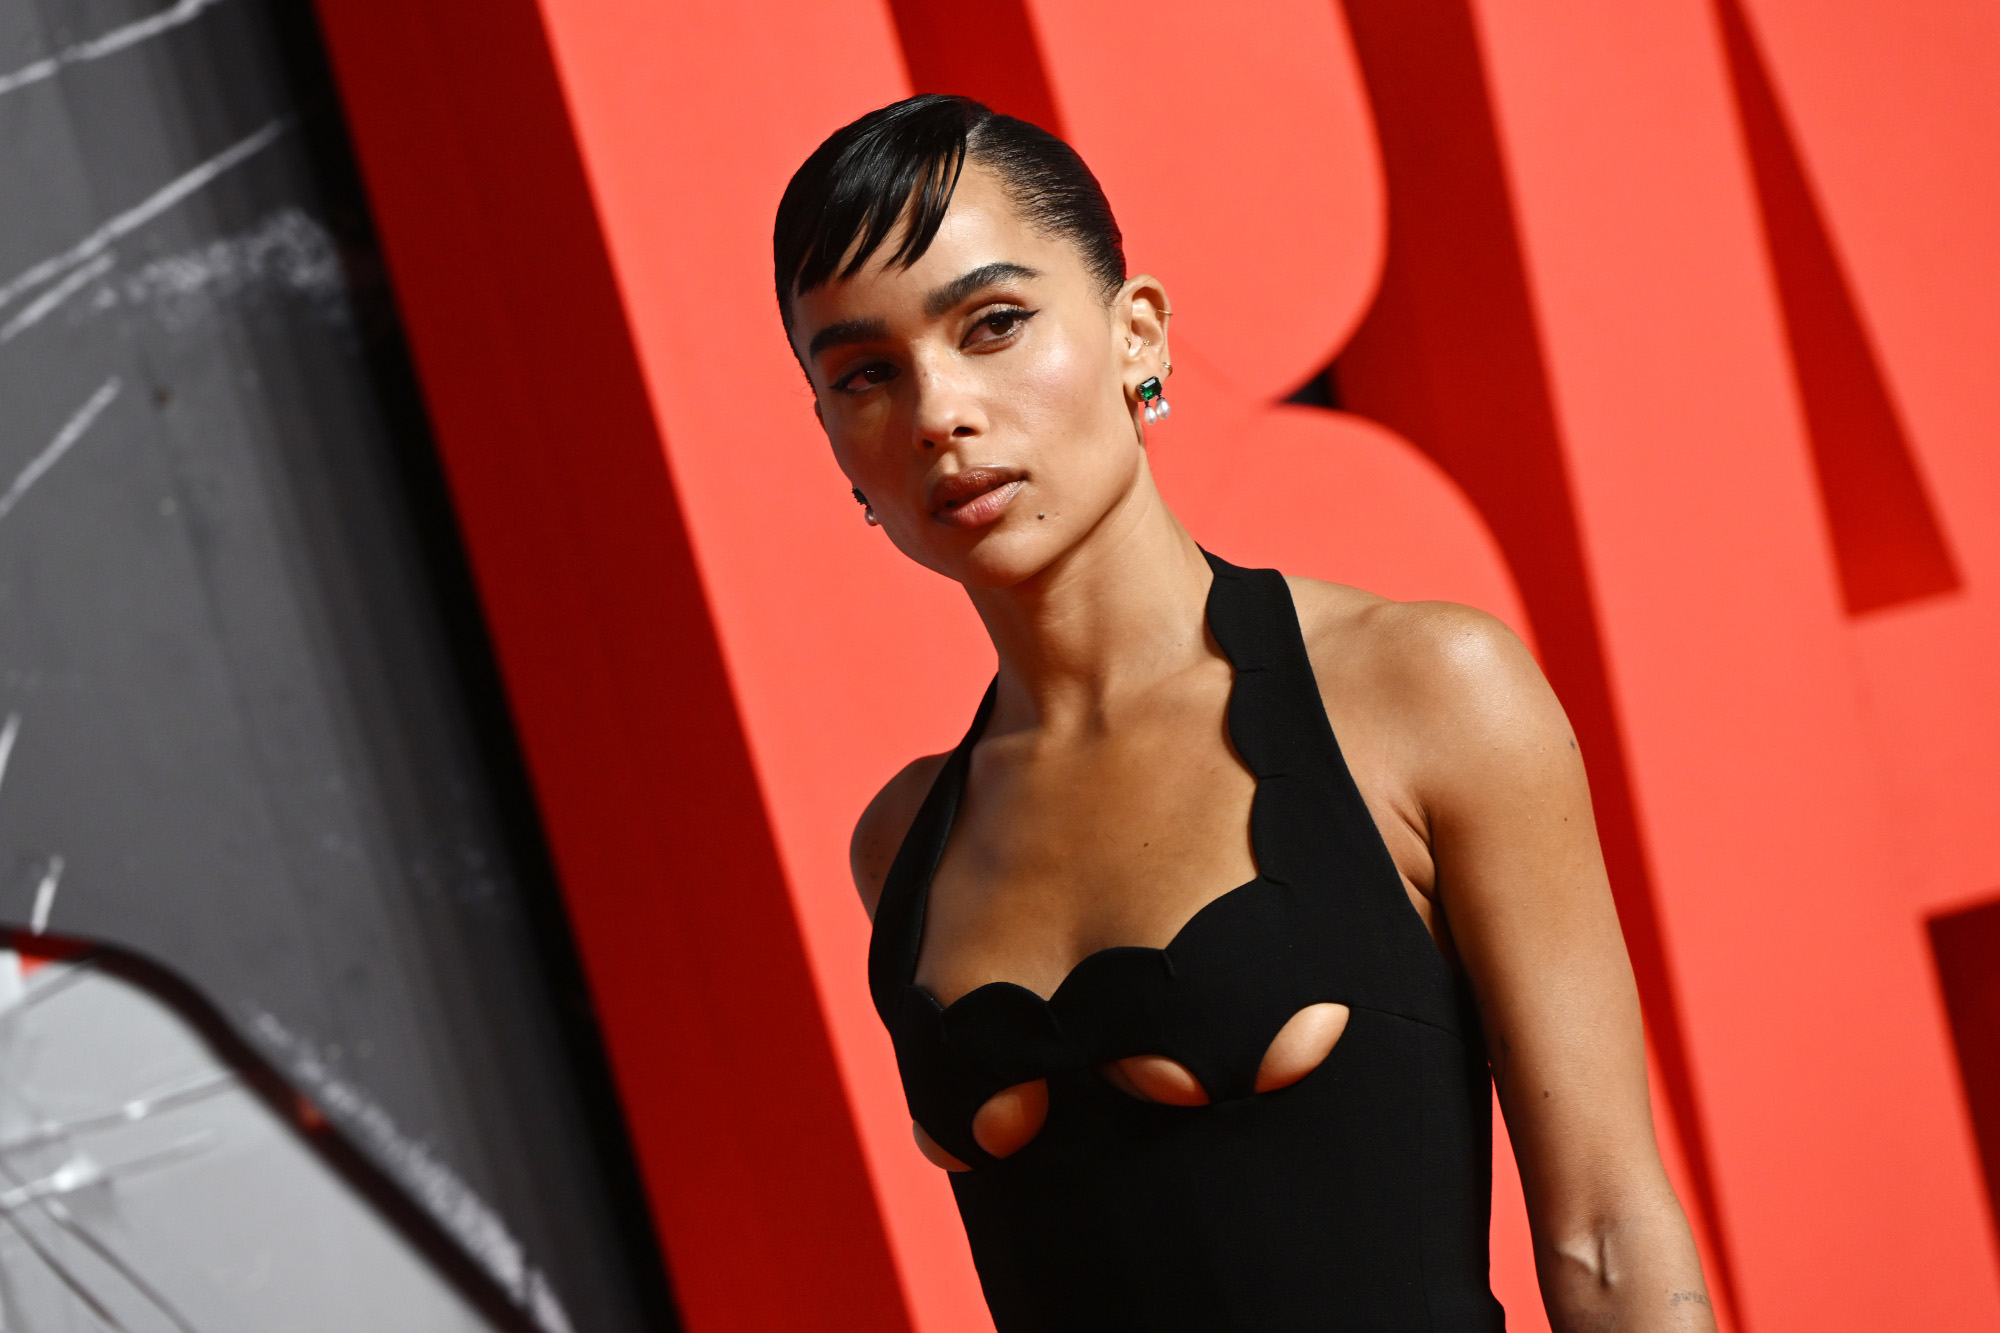 Catwoman actor Zoë Kravitz at a screening for 'The Batman.' She's wearing a black dress and standing in front of a red letter B.